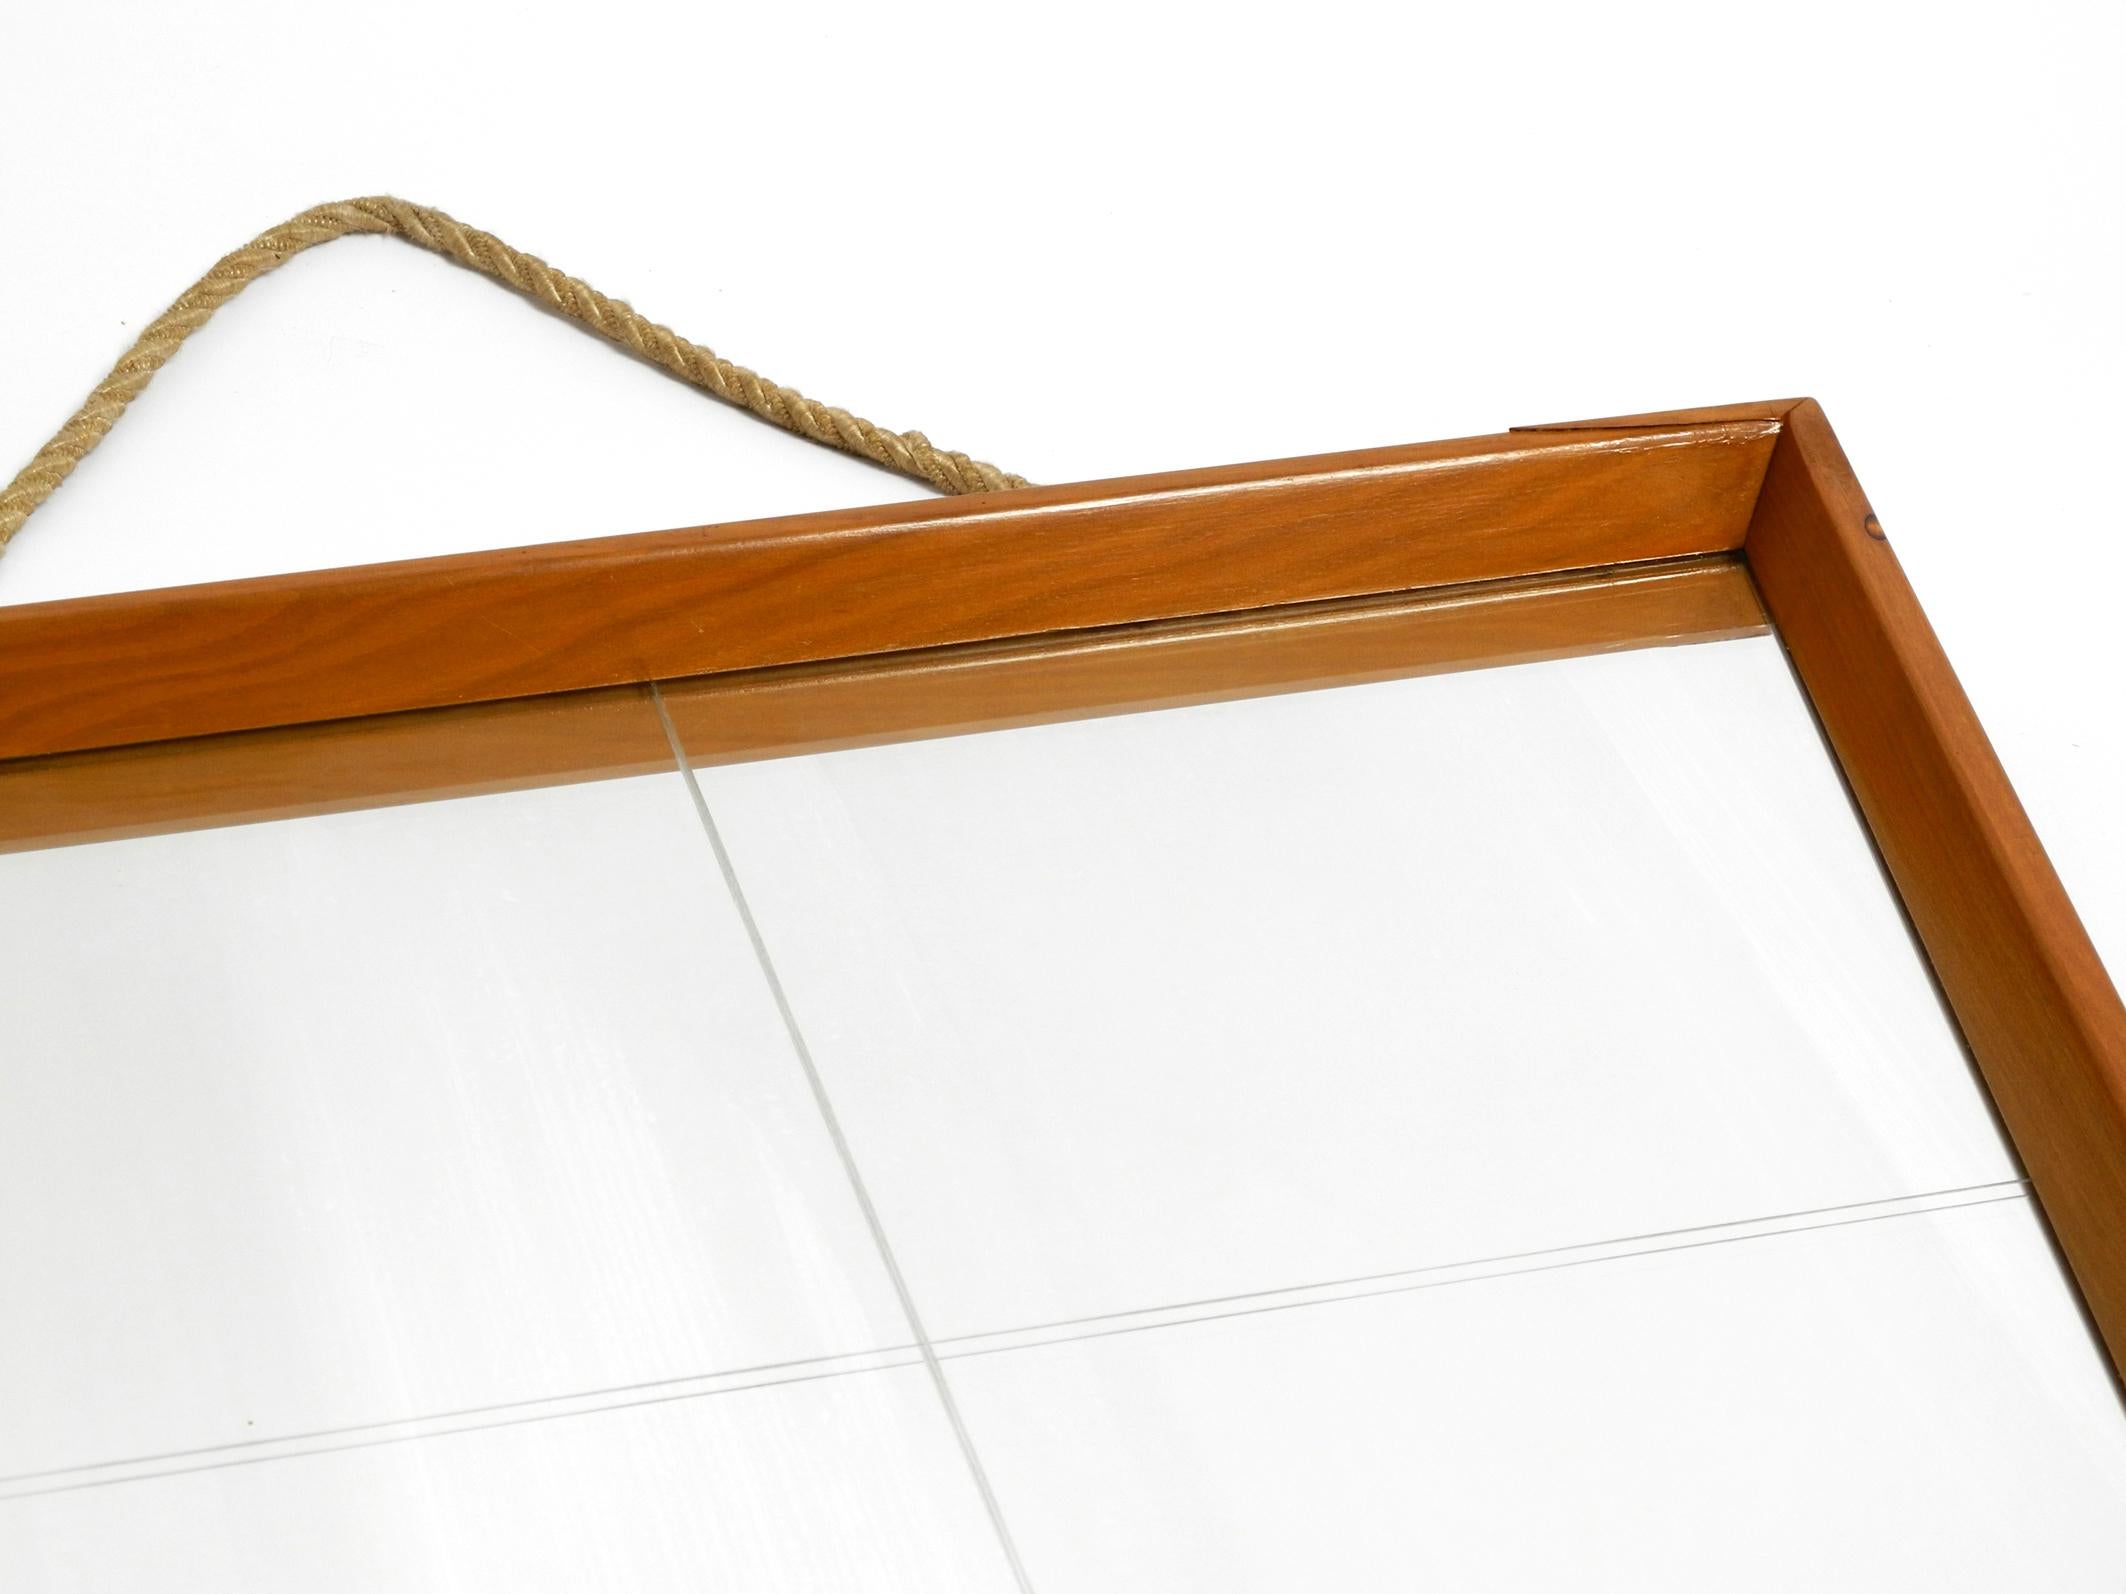 Large 1950s wall mirror in trapezoidal shape with a solid cherry wood frame For Sale 13